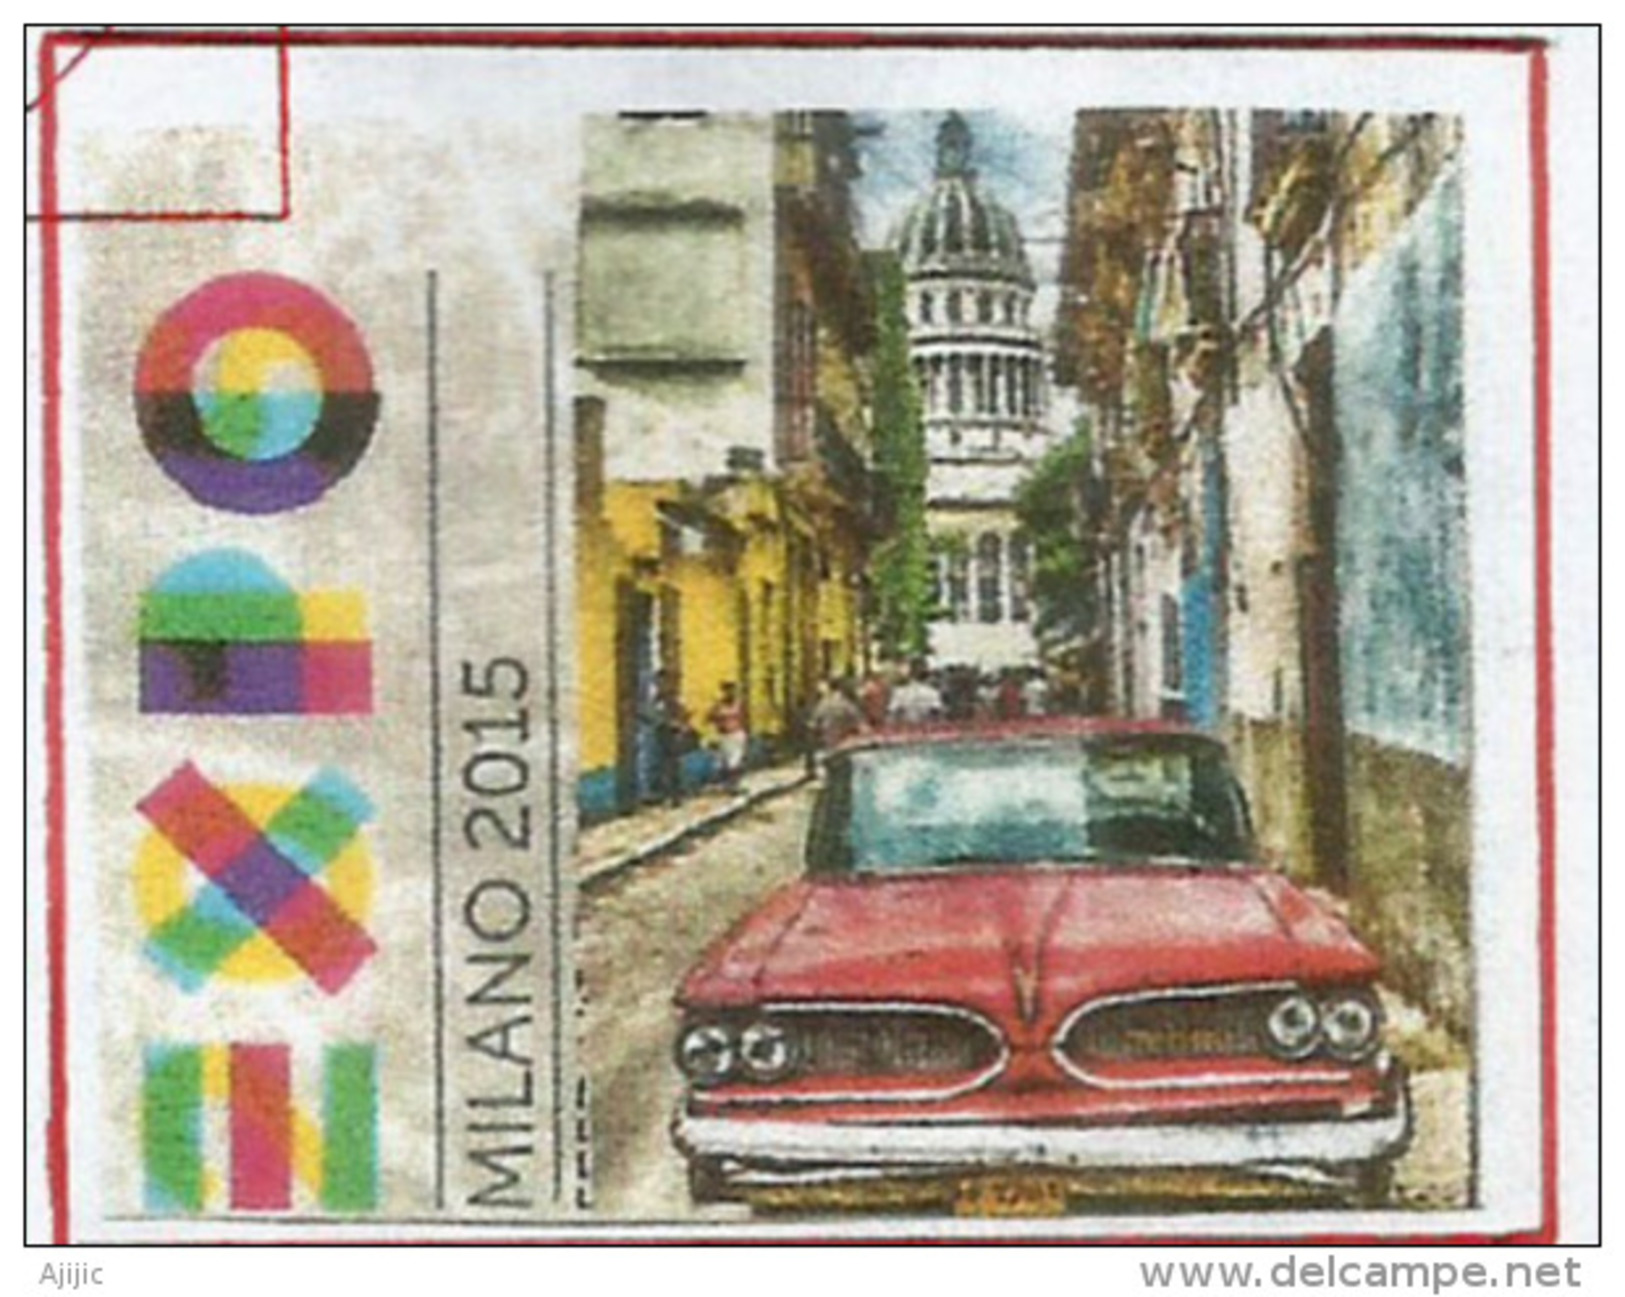 CUBA. UNIVERSAL EXPO MILANO 2015 .Letter From The Cuba Pavilion With Stamp Of Cuba + Official Stamps Pavilion + EXPO - Brieven En Documenten